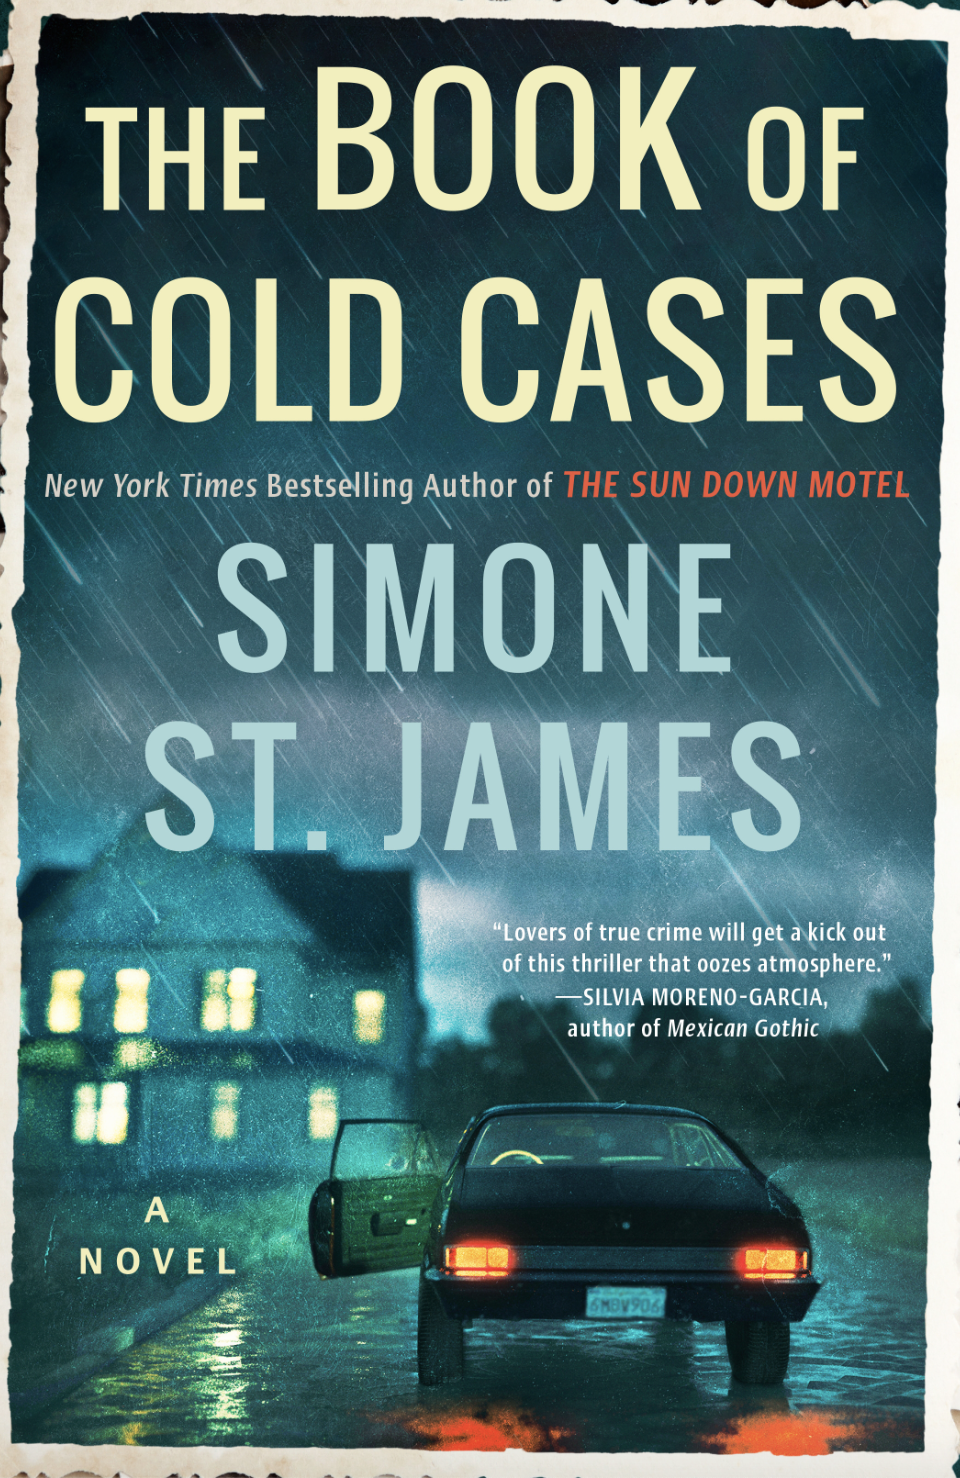 THE BOOK OF COLD CASES